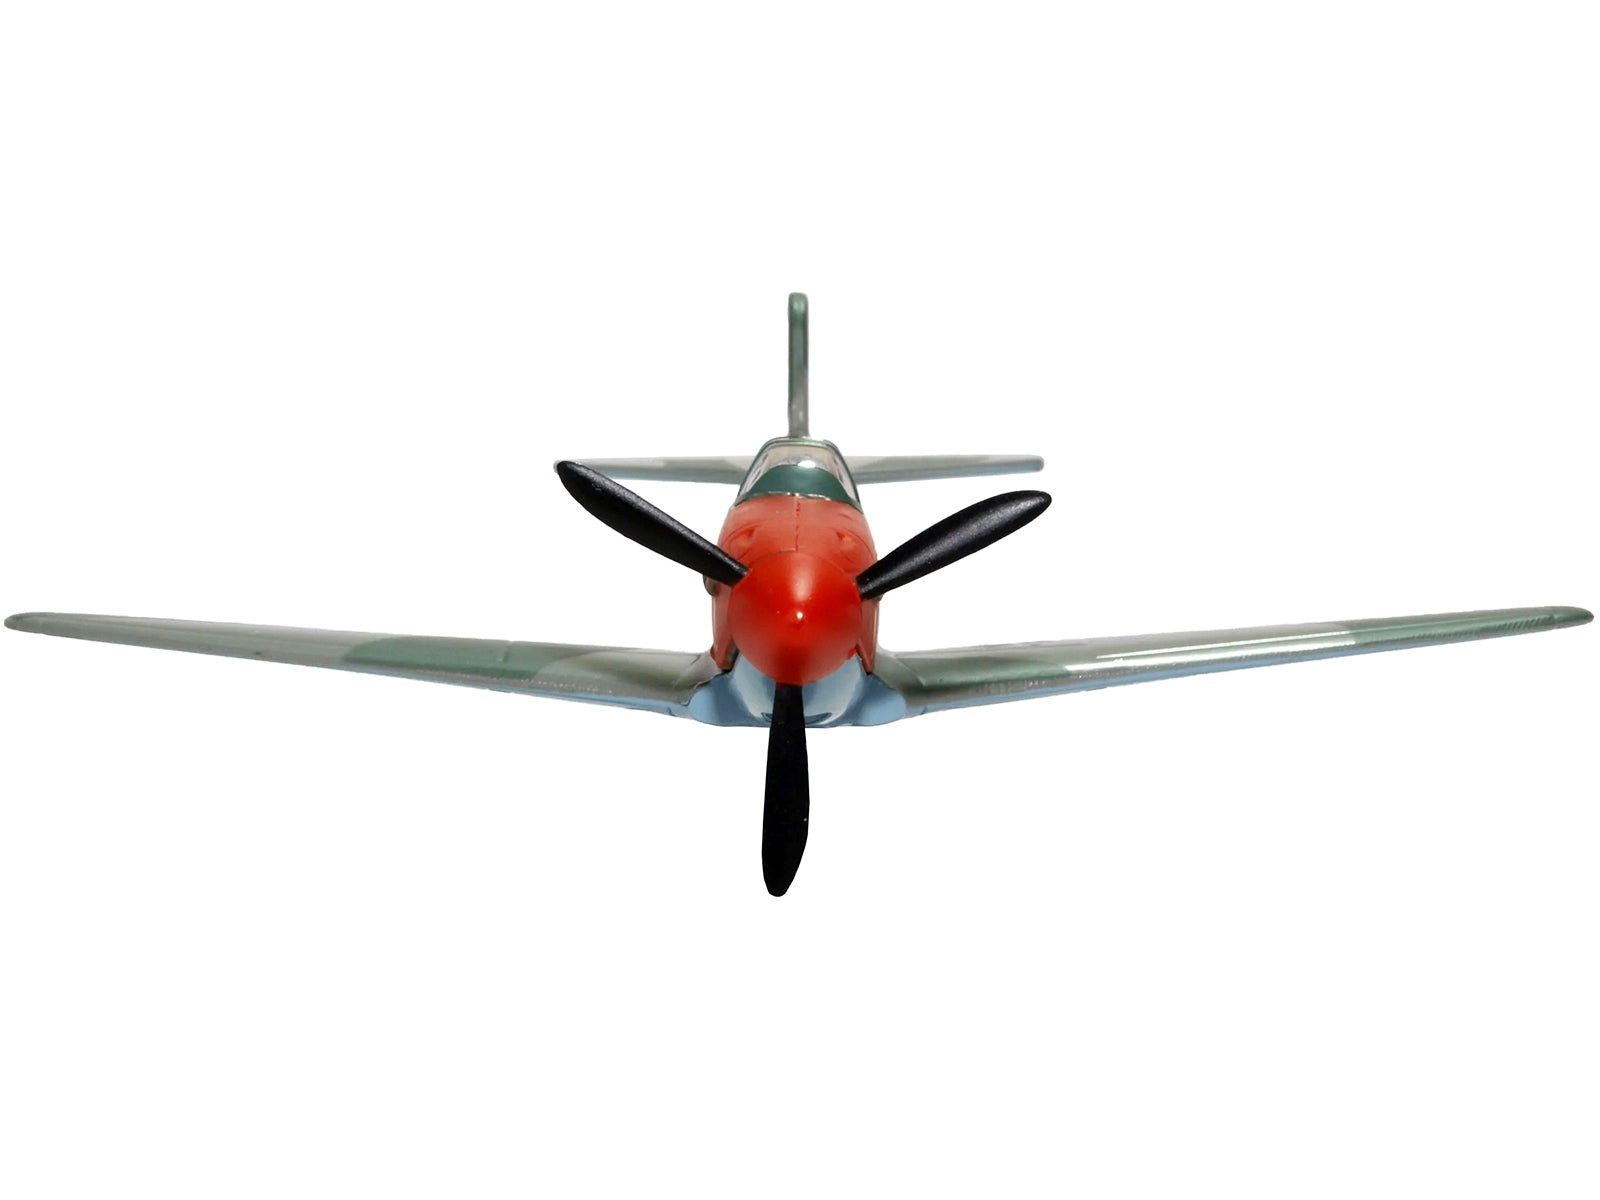 Yakovlev Yak 3 Fighter Aircraft "Anton Dmitrievich Yakimenko 150th Guards Fighter Regiment T/N 360" USSR "Oxford Aviation" Series 1/72 Diecast Model Airplane by Oxford Diecast Oxford Diecast